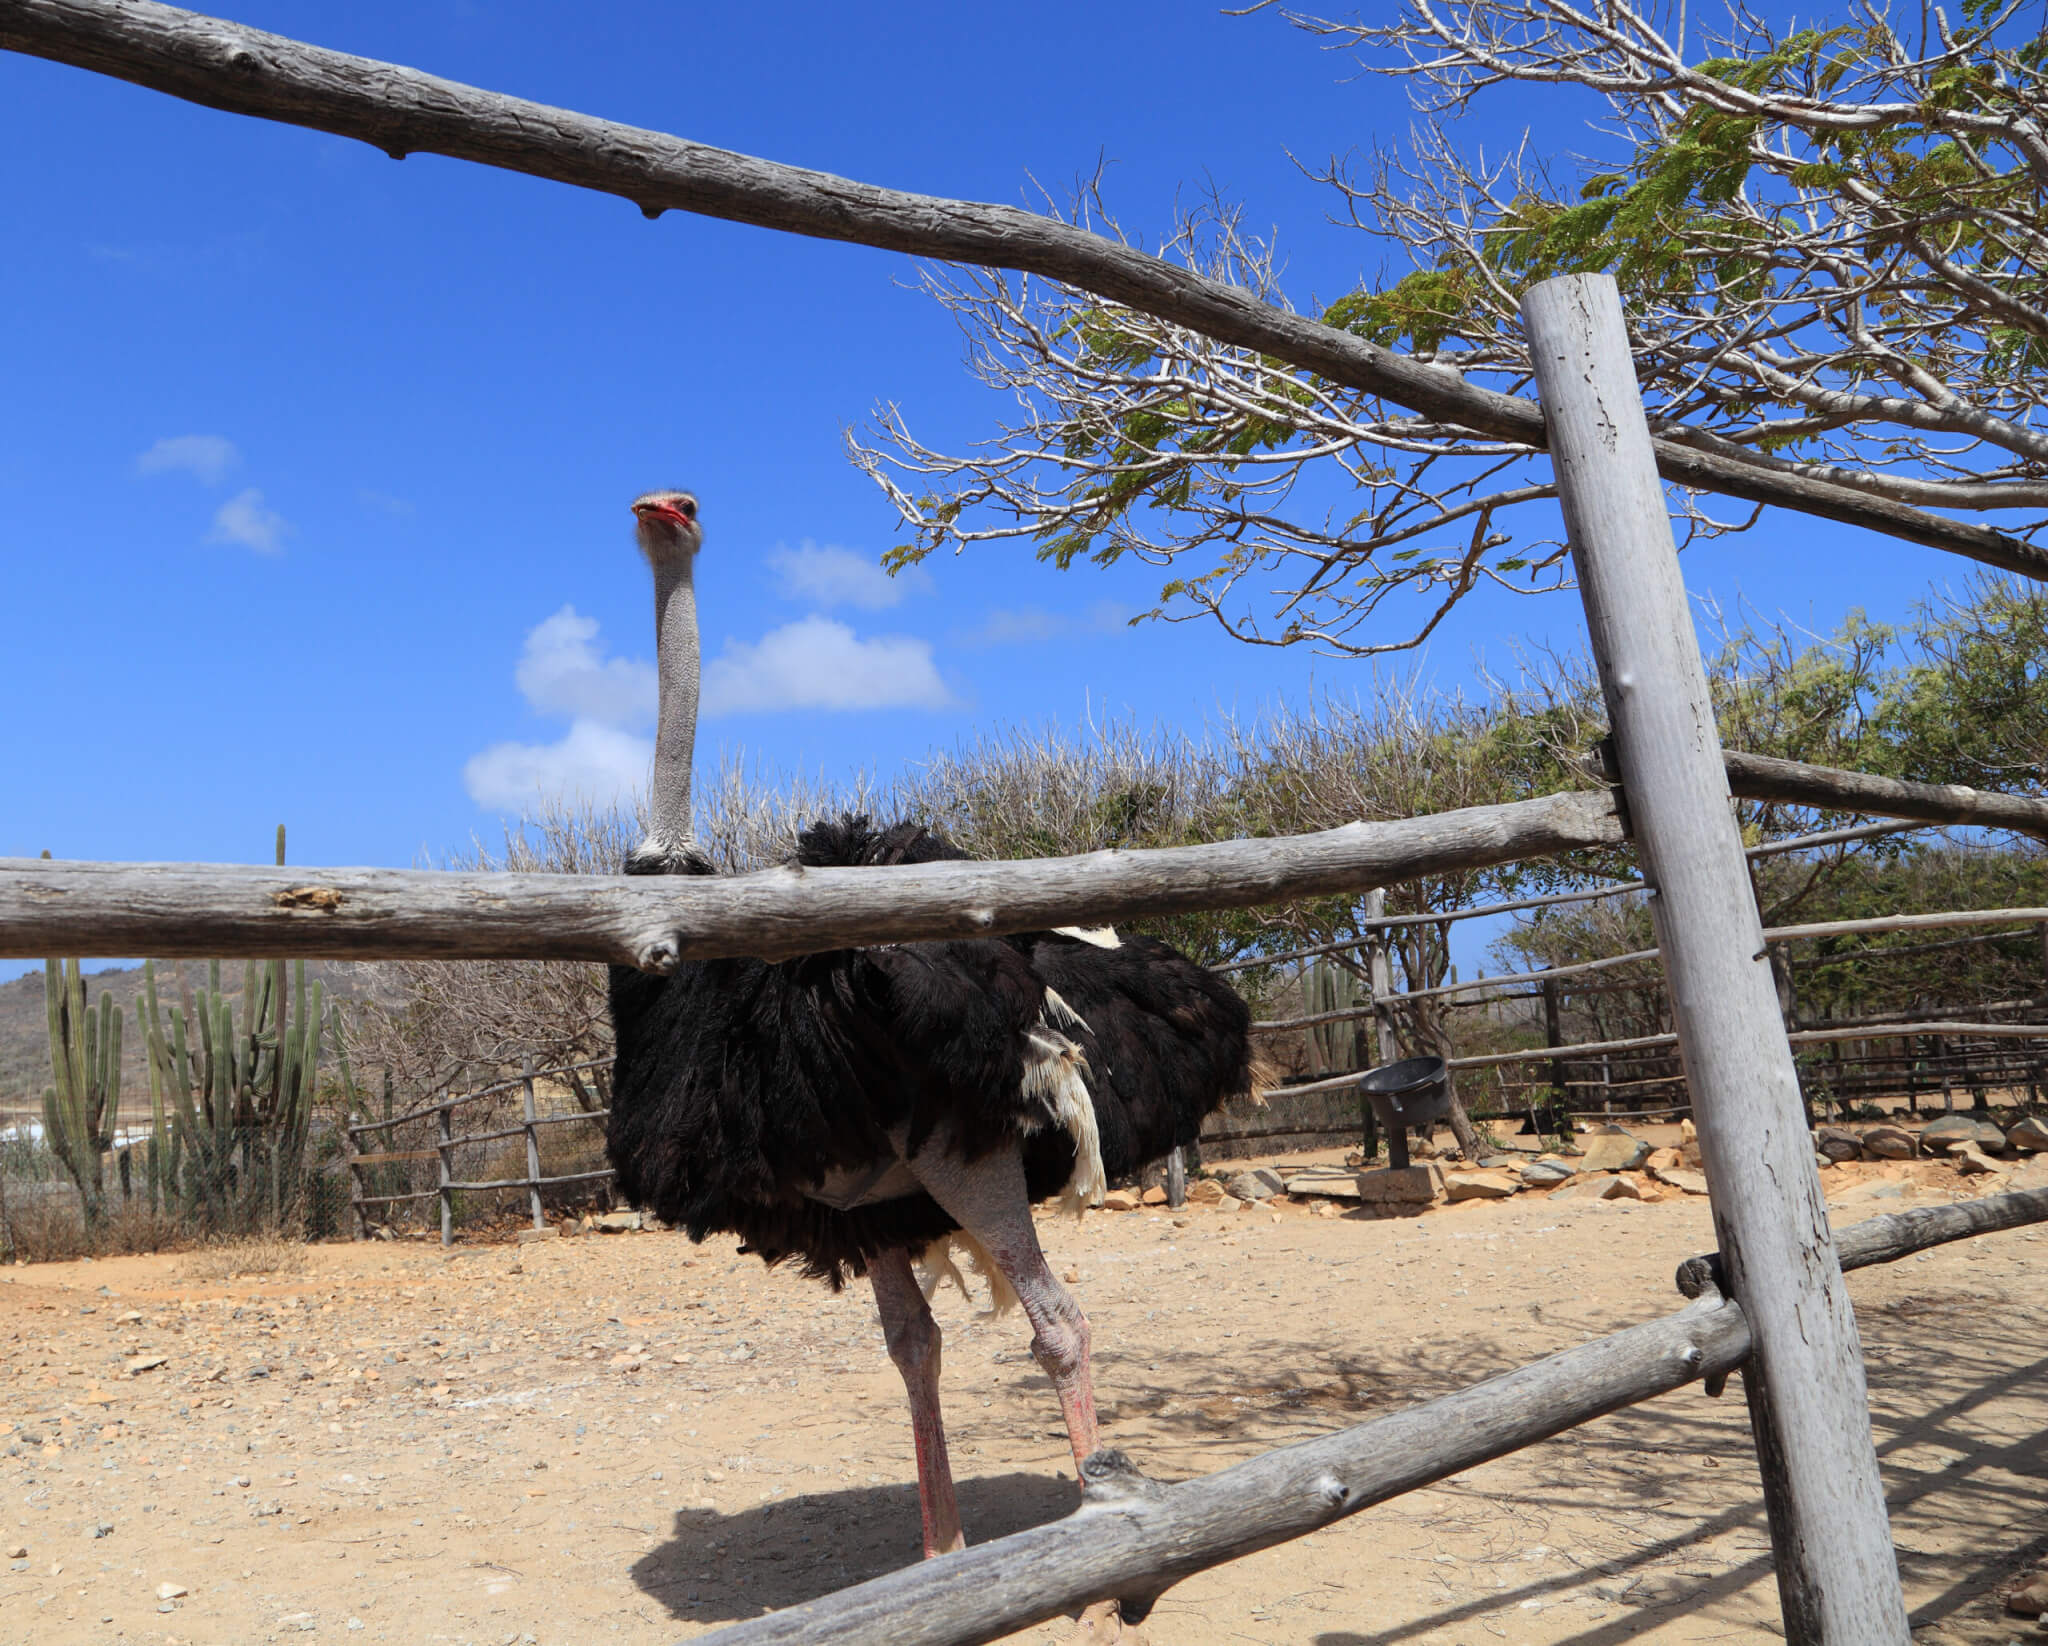 A lone male ostrich (Struthio camelus) looks out from his pen at the Aruba Ostrich Farm, Paradera, Aruba.